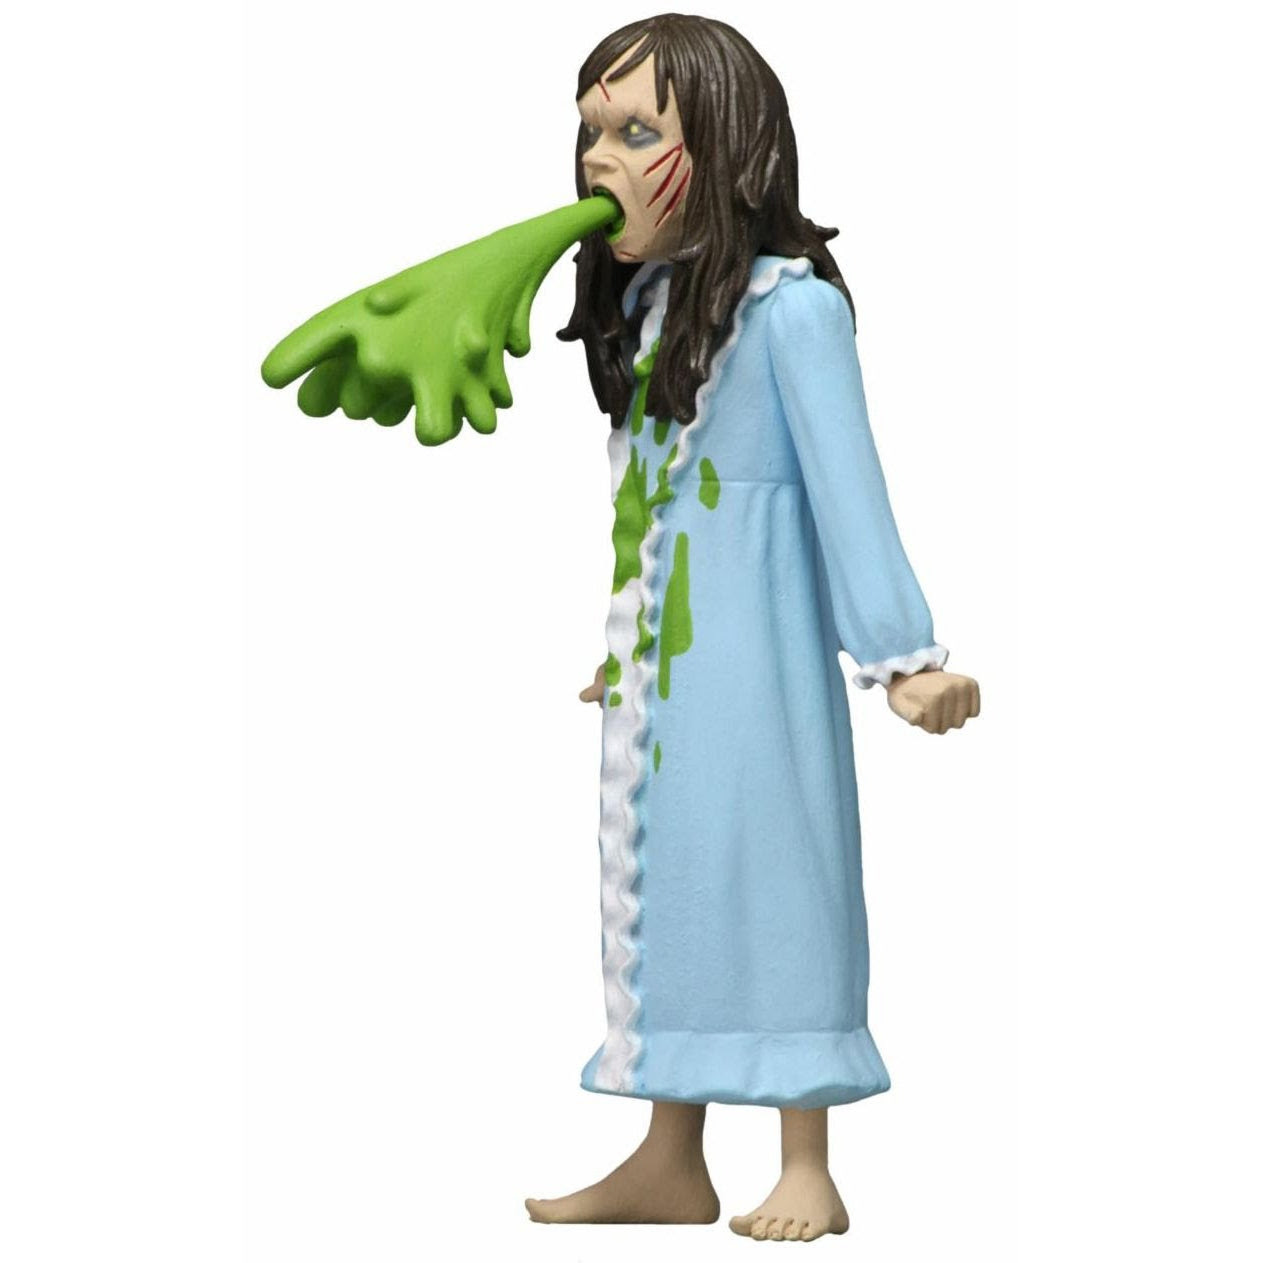 Image of Toony Terrors 6” Scale Action Figure Series 4 - Regan (The Exorcist) - JULY 2020